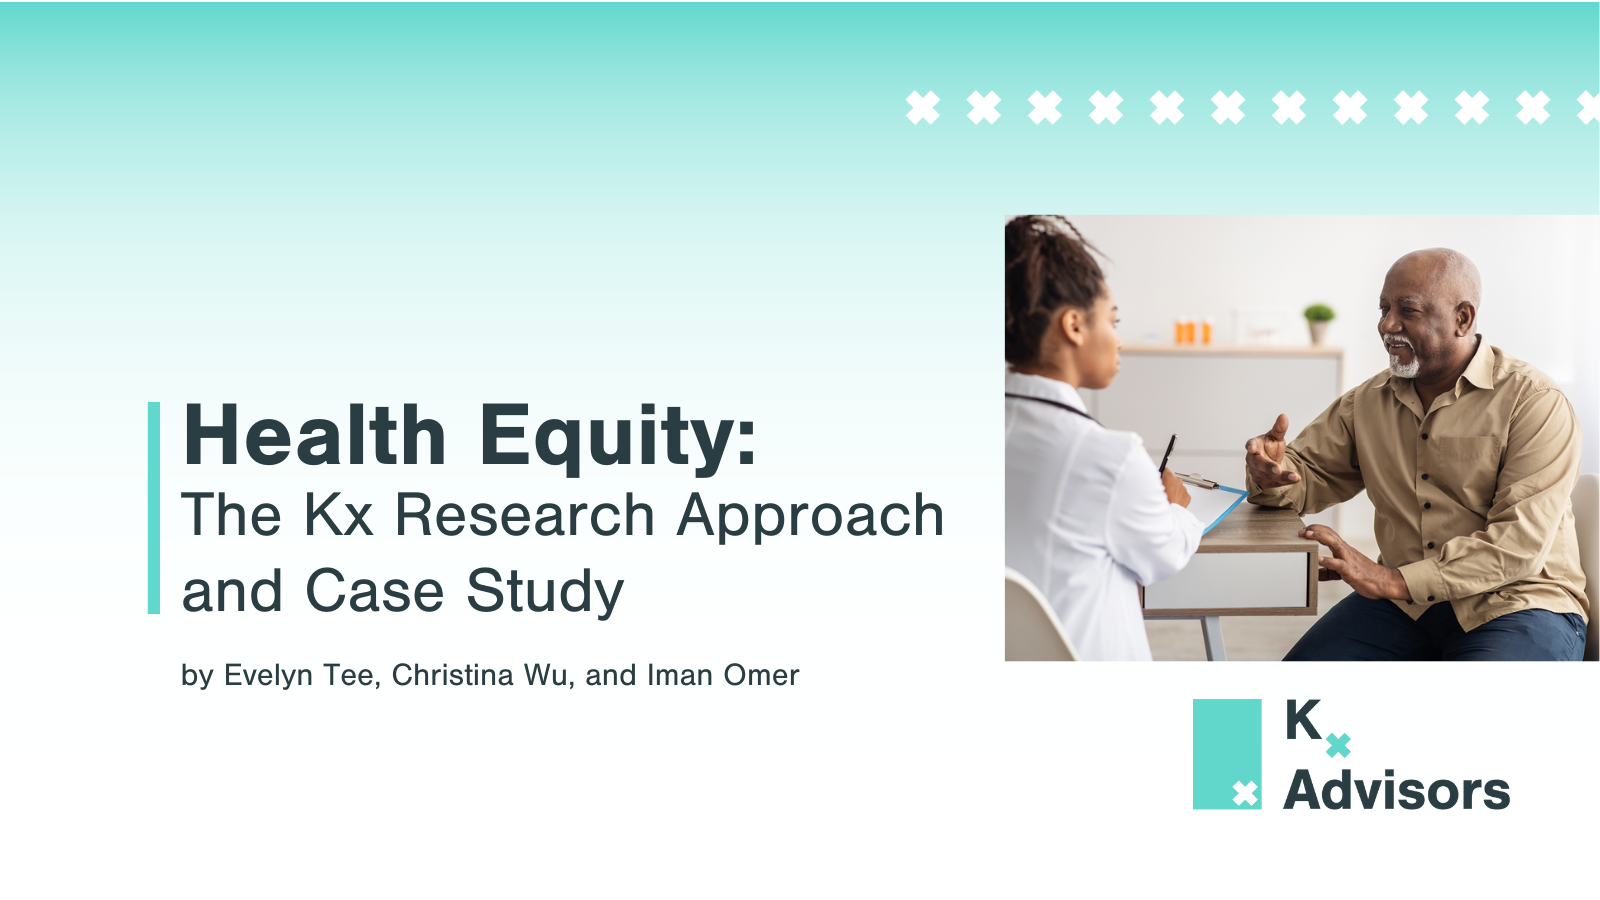 Health Equity: The Kx Research Approach and Case Study